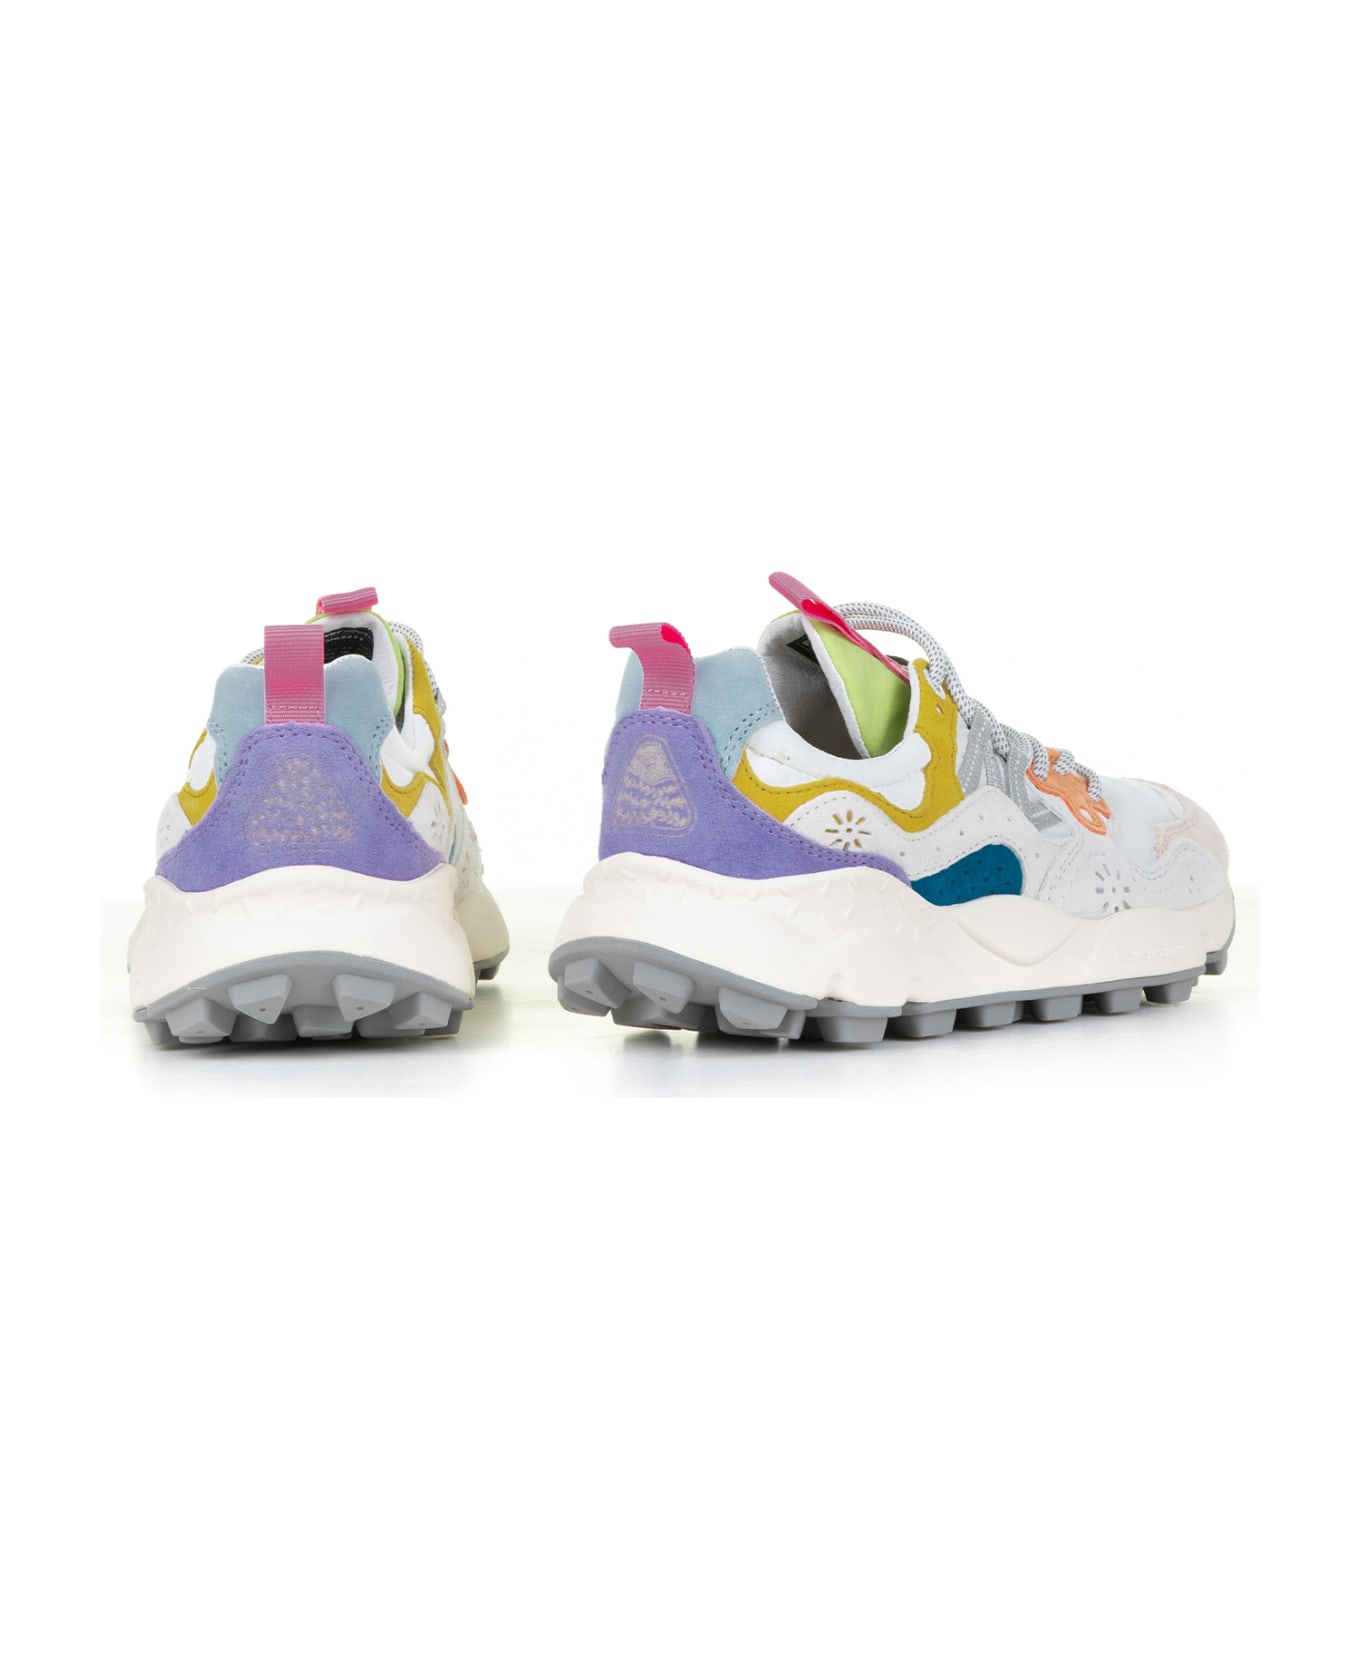 Flower Mountain Multicolored Yamano Sneakers In Suede And Nylon - WHITE PINK スニーカー